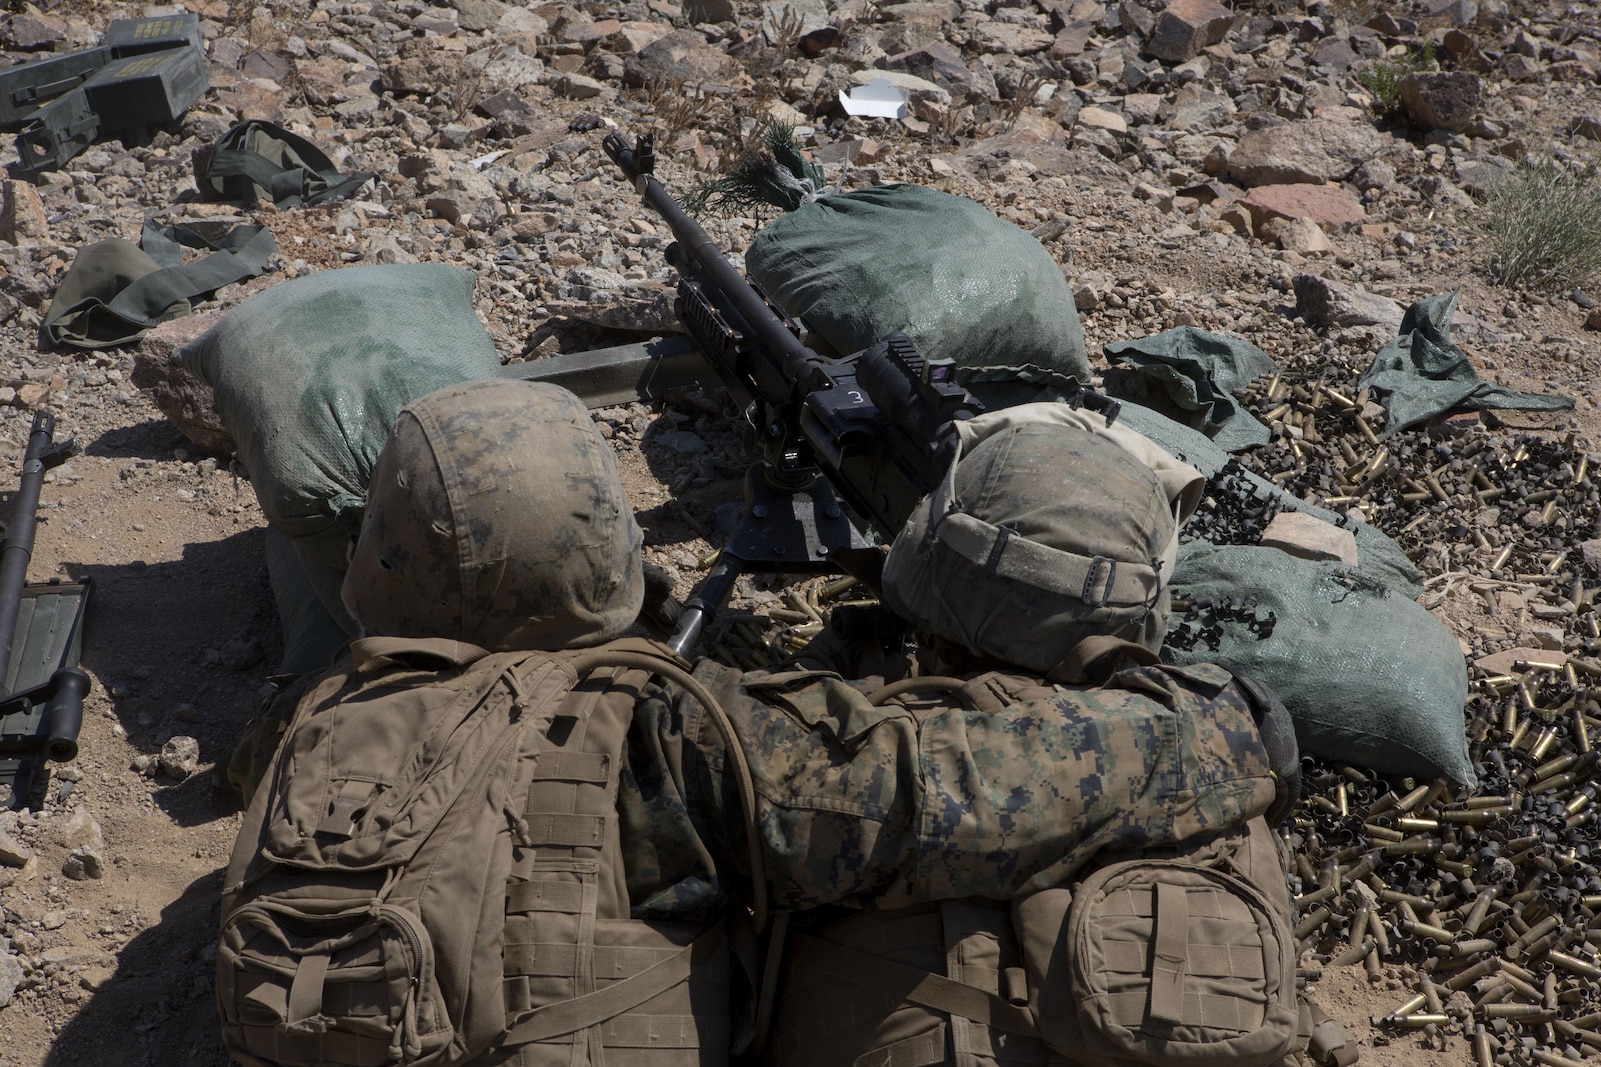 U.S. Marines with Golf Company, 2nd Battalion, 25th Marines, 4th Marine Division, Marine Forces Reserve, fire on range 400 as part of Integrated Training Exercise 4-17 at Camp Wilson, Twentynine Palms, California on June 18, 2017. ITX is the largest annual Marine Forces Reserve training exercise, bringing together over 5,000 Marines from across the United States to prepare battalion and squadron-sized units for combat, under the most realistic conditions possible